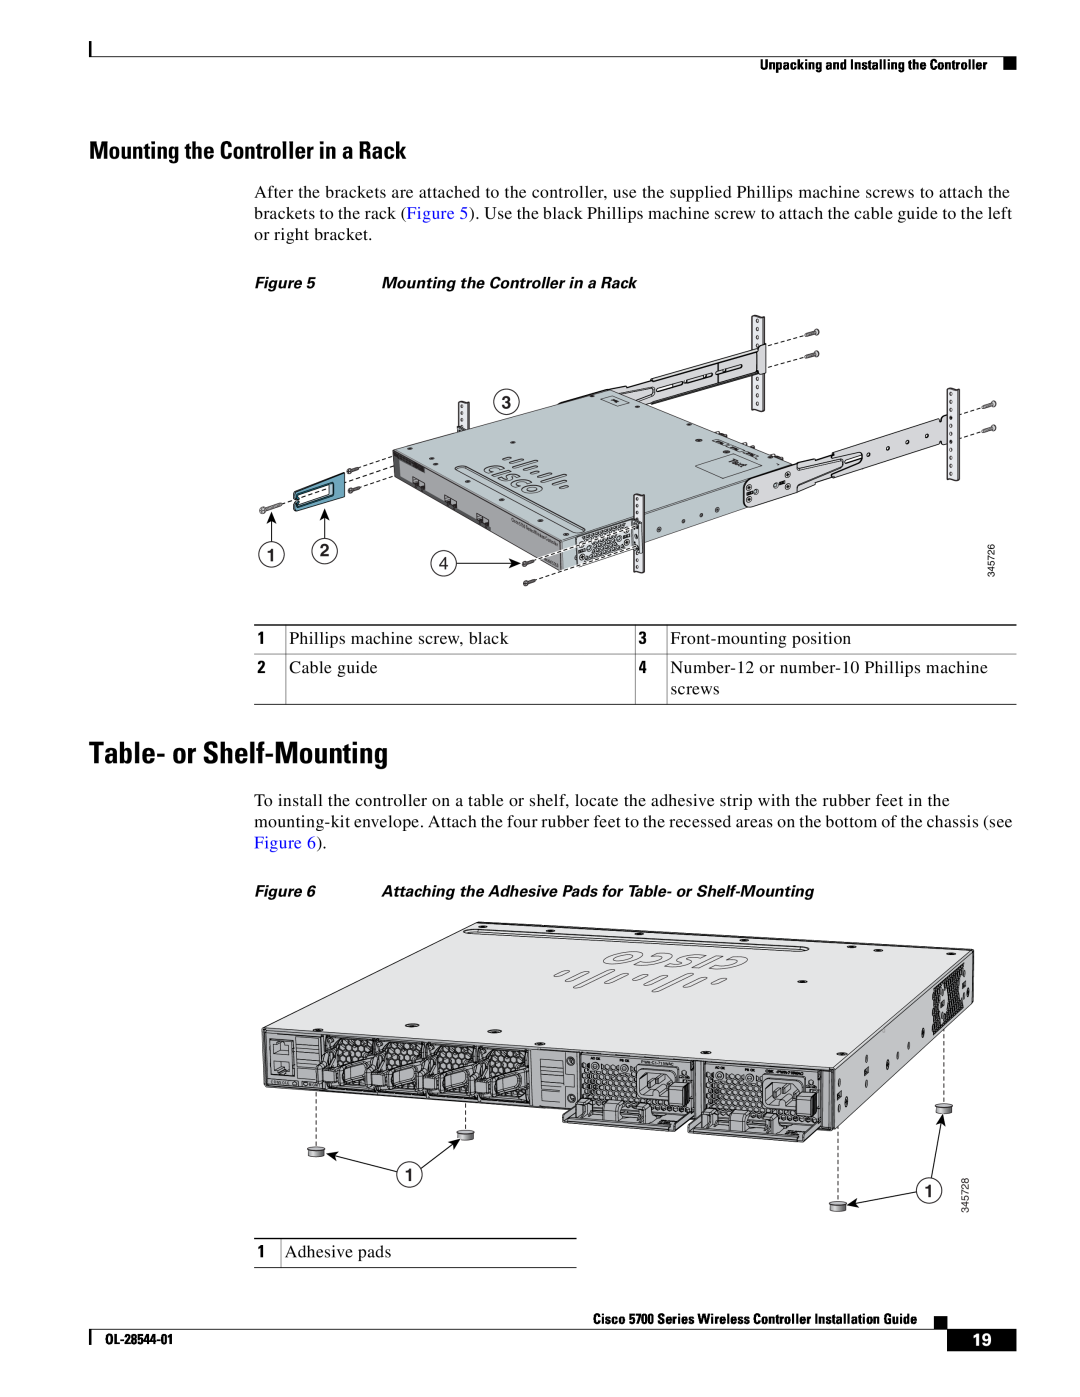 Cisco Systems AIRCT576025K9, AIRCT5760HAK9 specifications Table- or Shelf-Mounting, Mounting the Controller in a Rack 